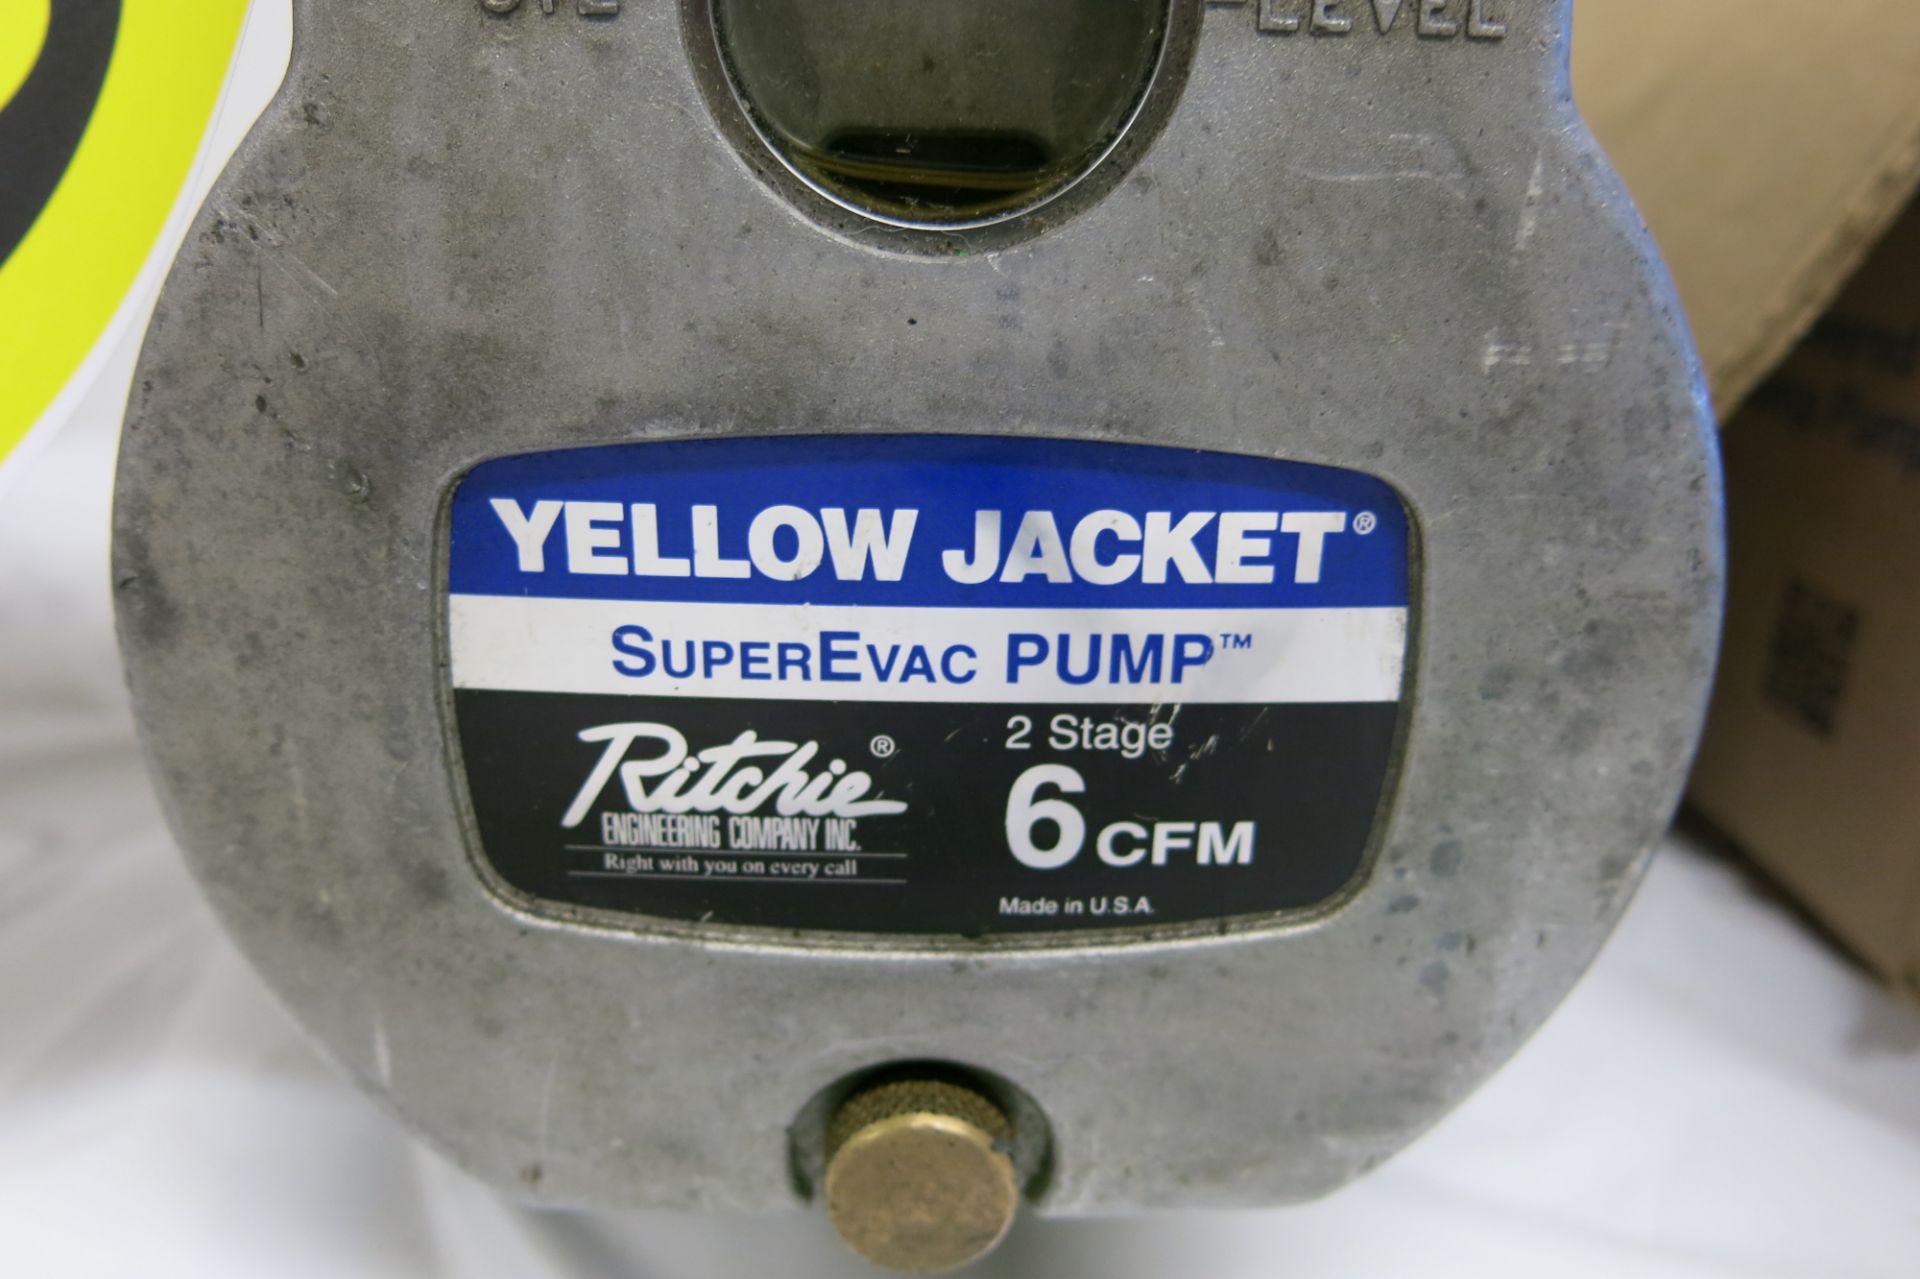 YELLOW JACKET, 93460, 6 CFM, 2 STAGE, SUPEREVAC PUMP, S/N G188382 (LOCATED IN MISSISSAUGA) - Image 2 of 4